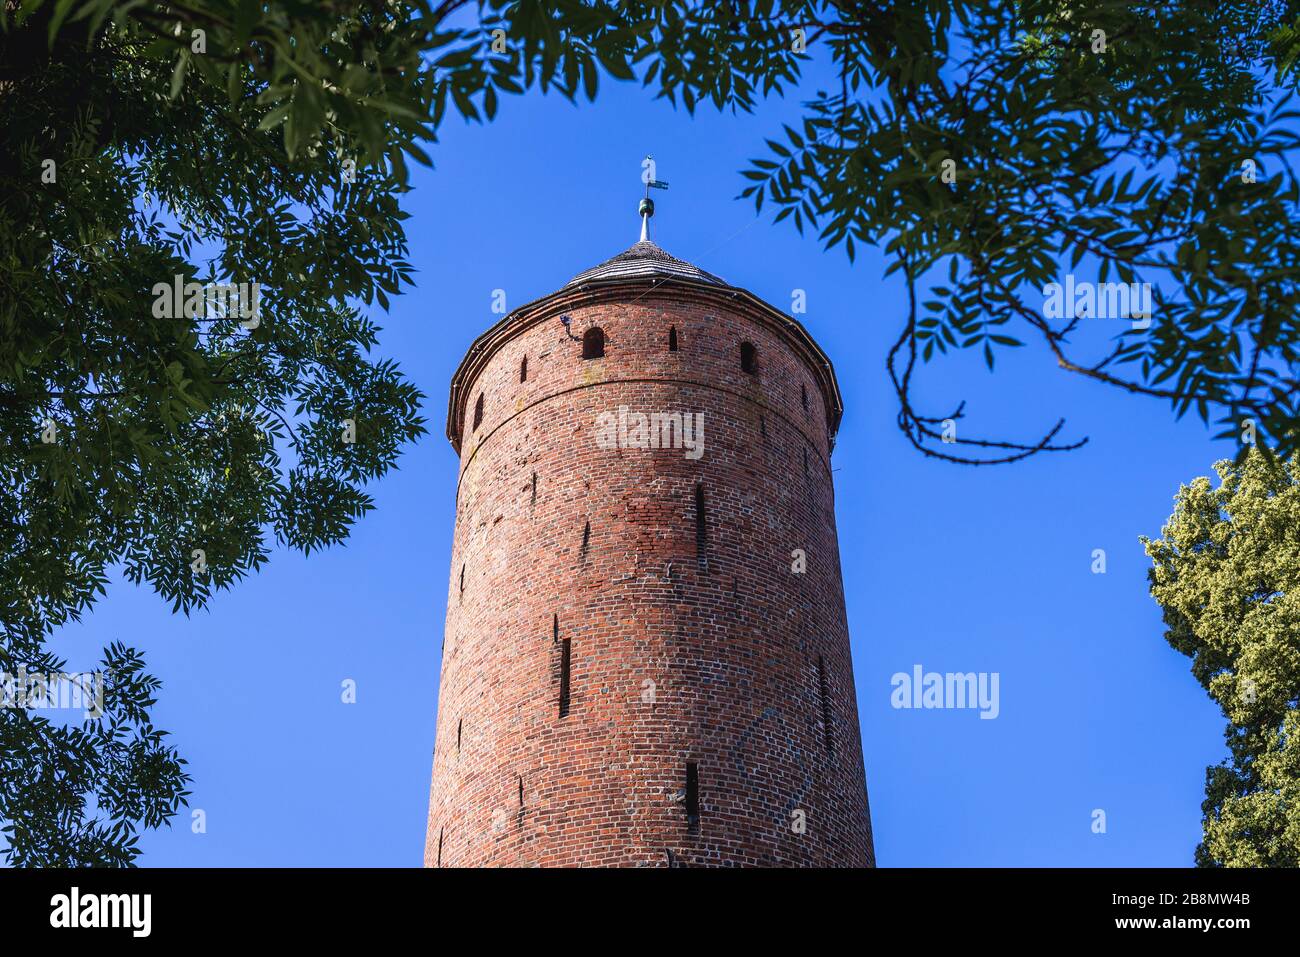 Tower of medieval knights castle in Swidwin, capital of Swidwin County in West Pomeranian Voivodeship of northwestern Poland Stock Photo